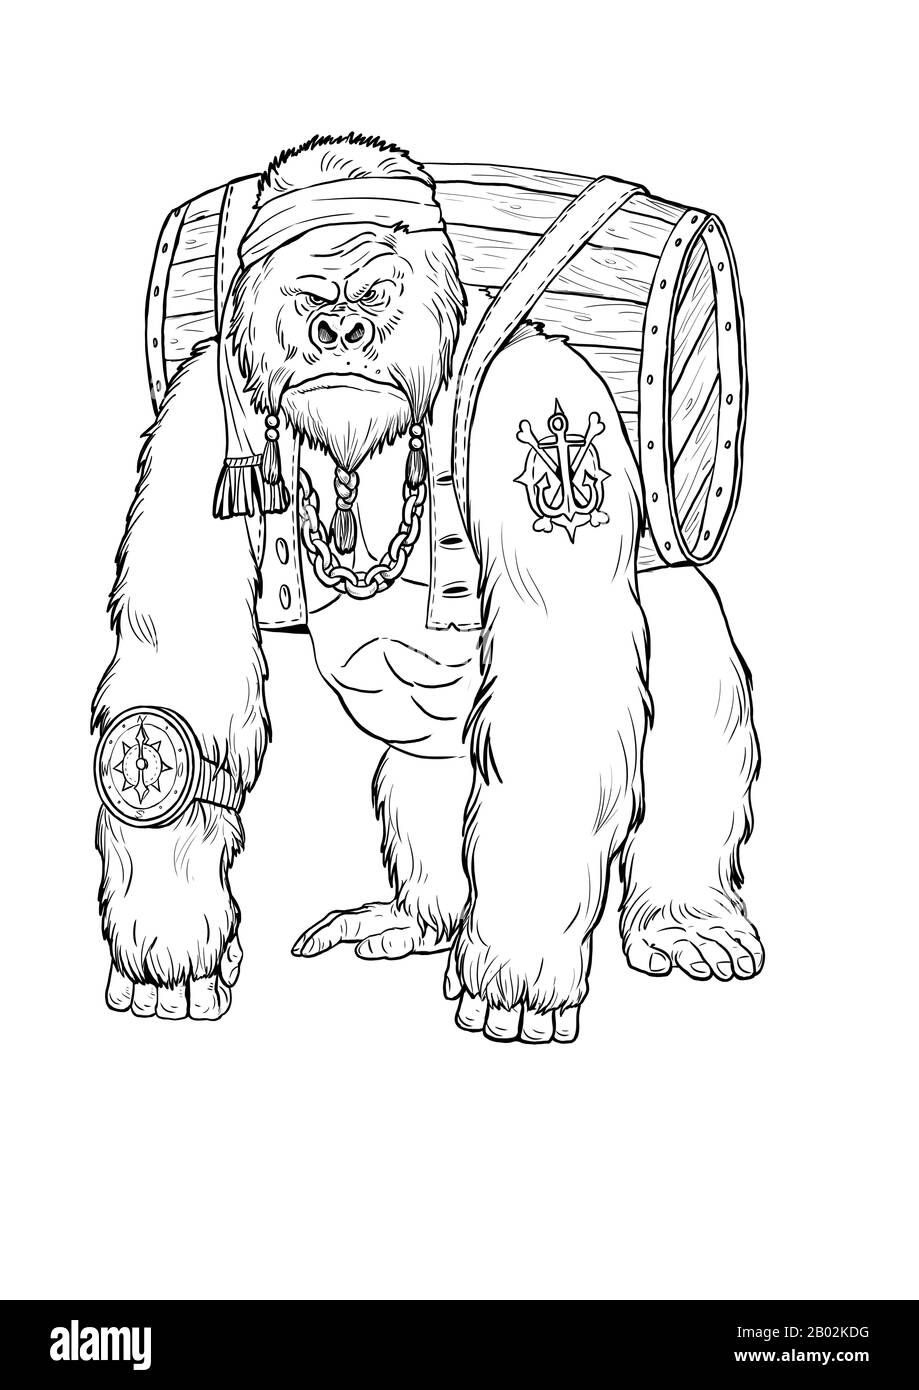 Big gorilla pirate coloring page outline clipart illustration monkey and apes pirates coloring sheet stock photo